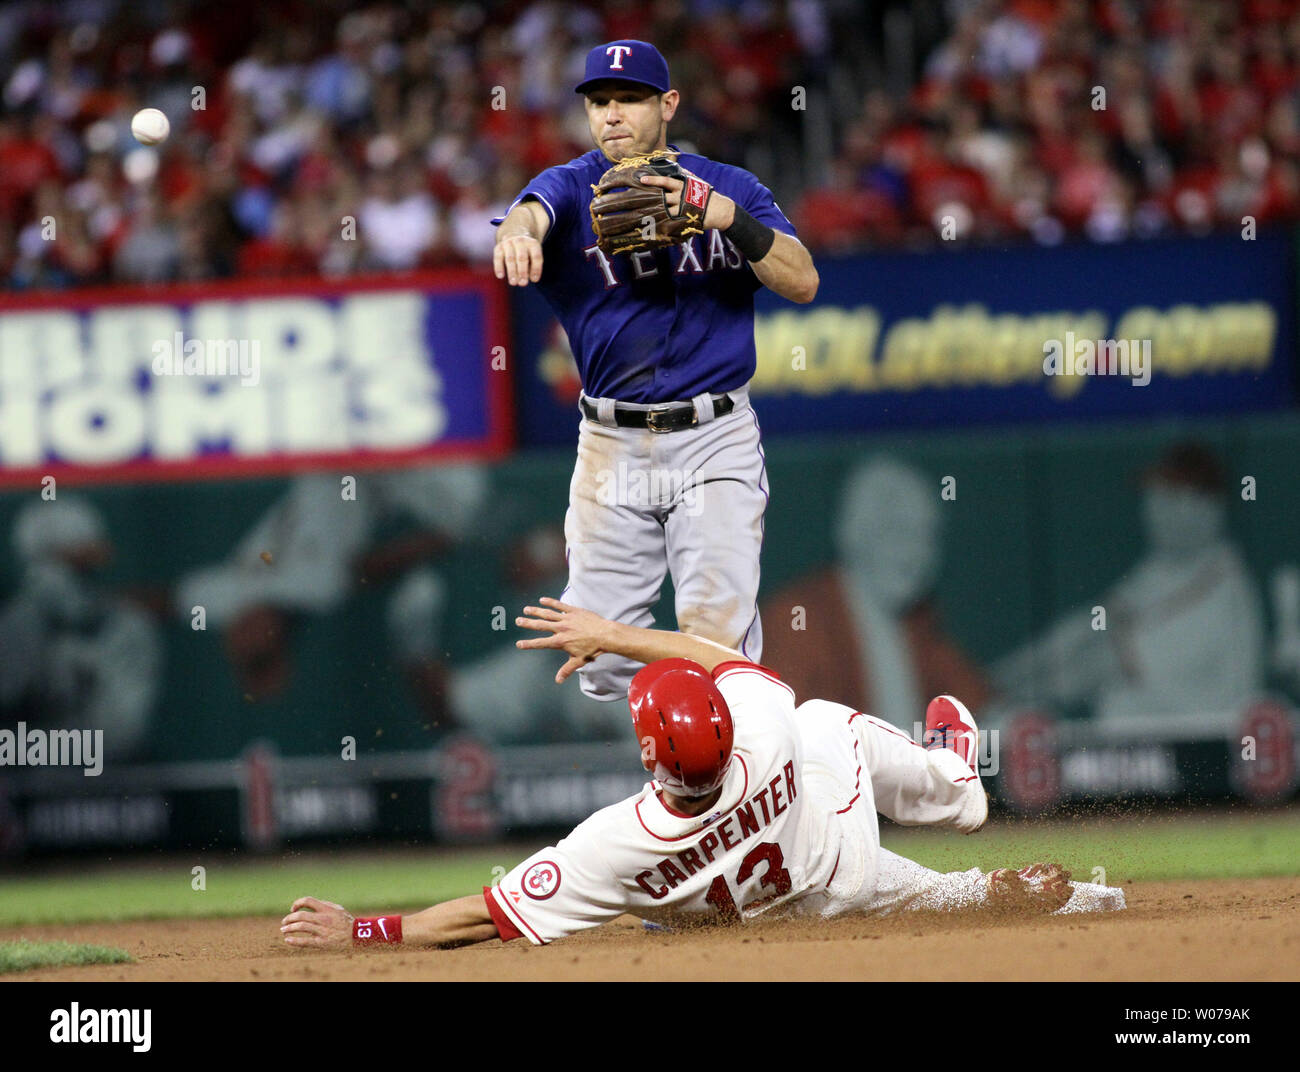 Texas Ranger Ian Kinsler jumps over St.Louis Cardinial Matt Carpenter in  the 8th inning at Busch Stadium in St. Louis on June 22, 2013. The Rangers  defeated the Cardinals 4-2 UPI/Rob Cornforth